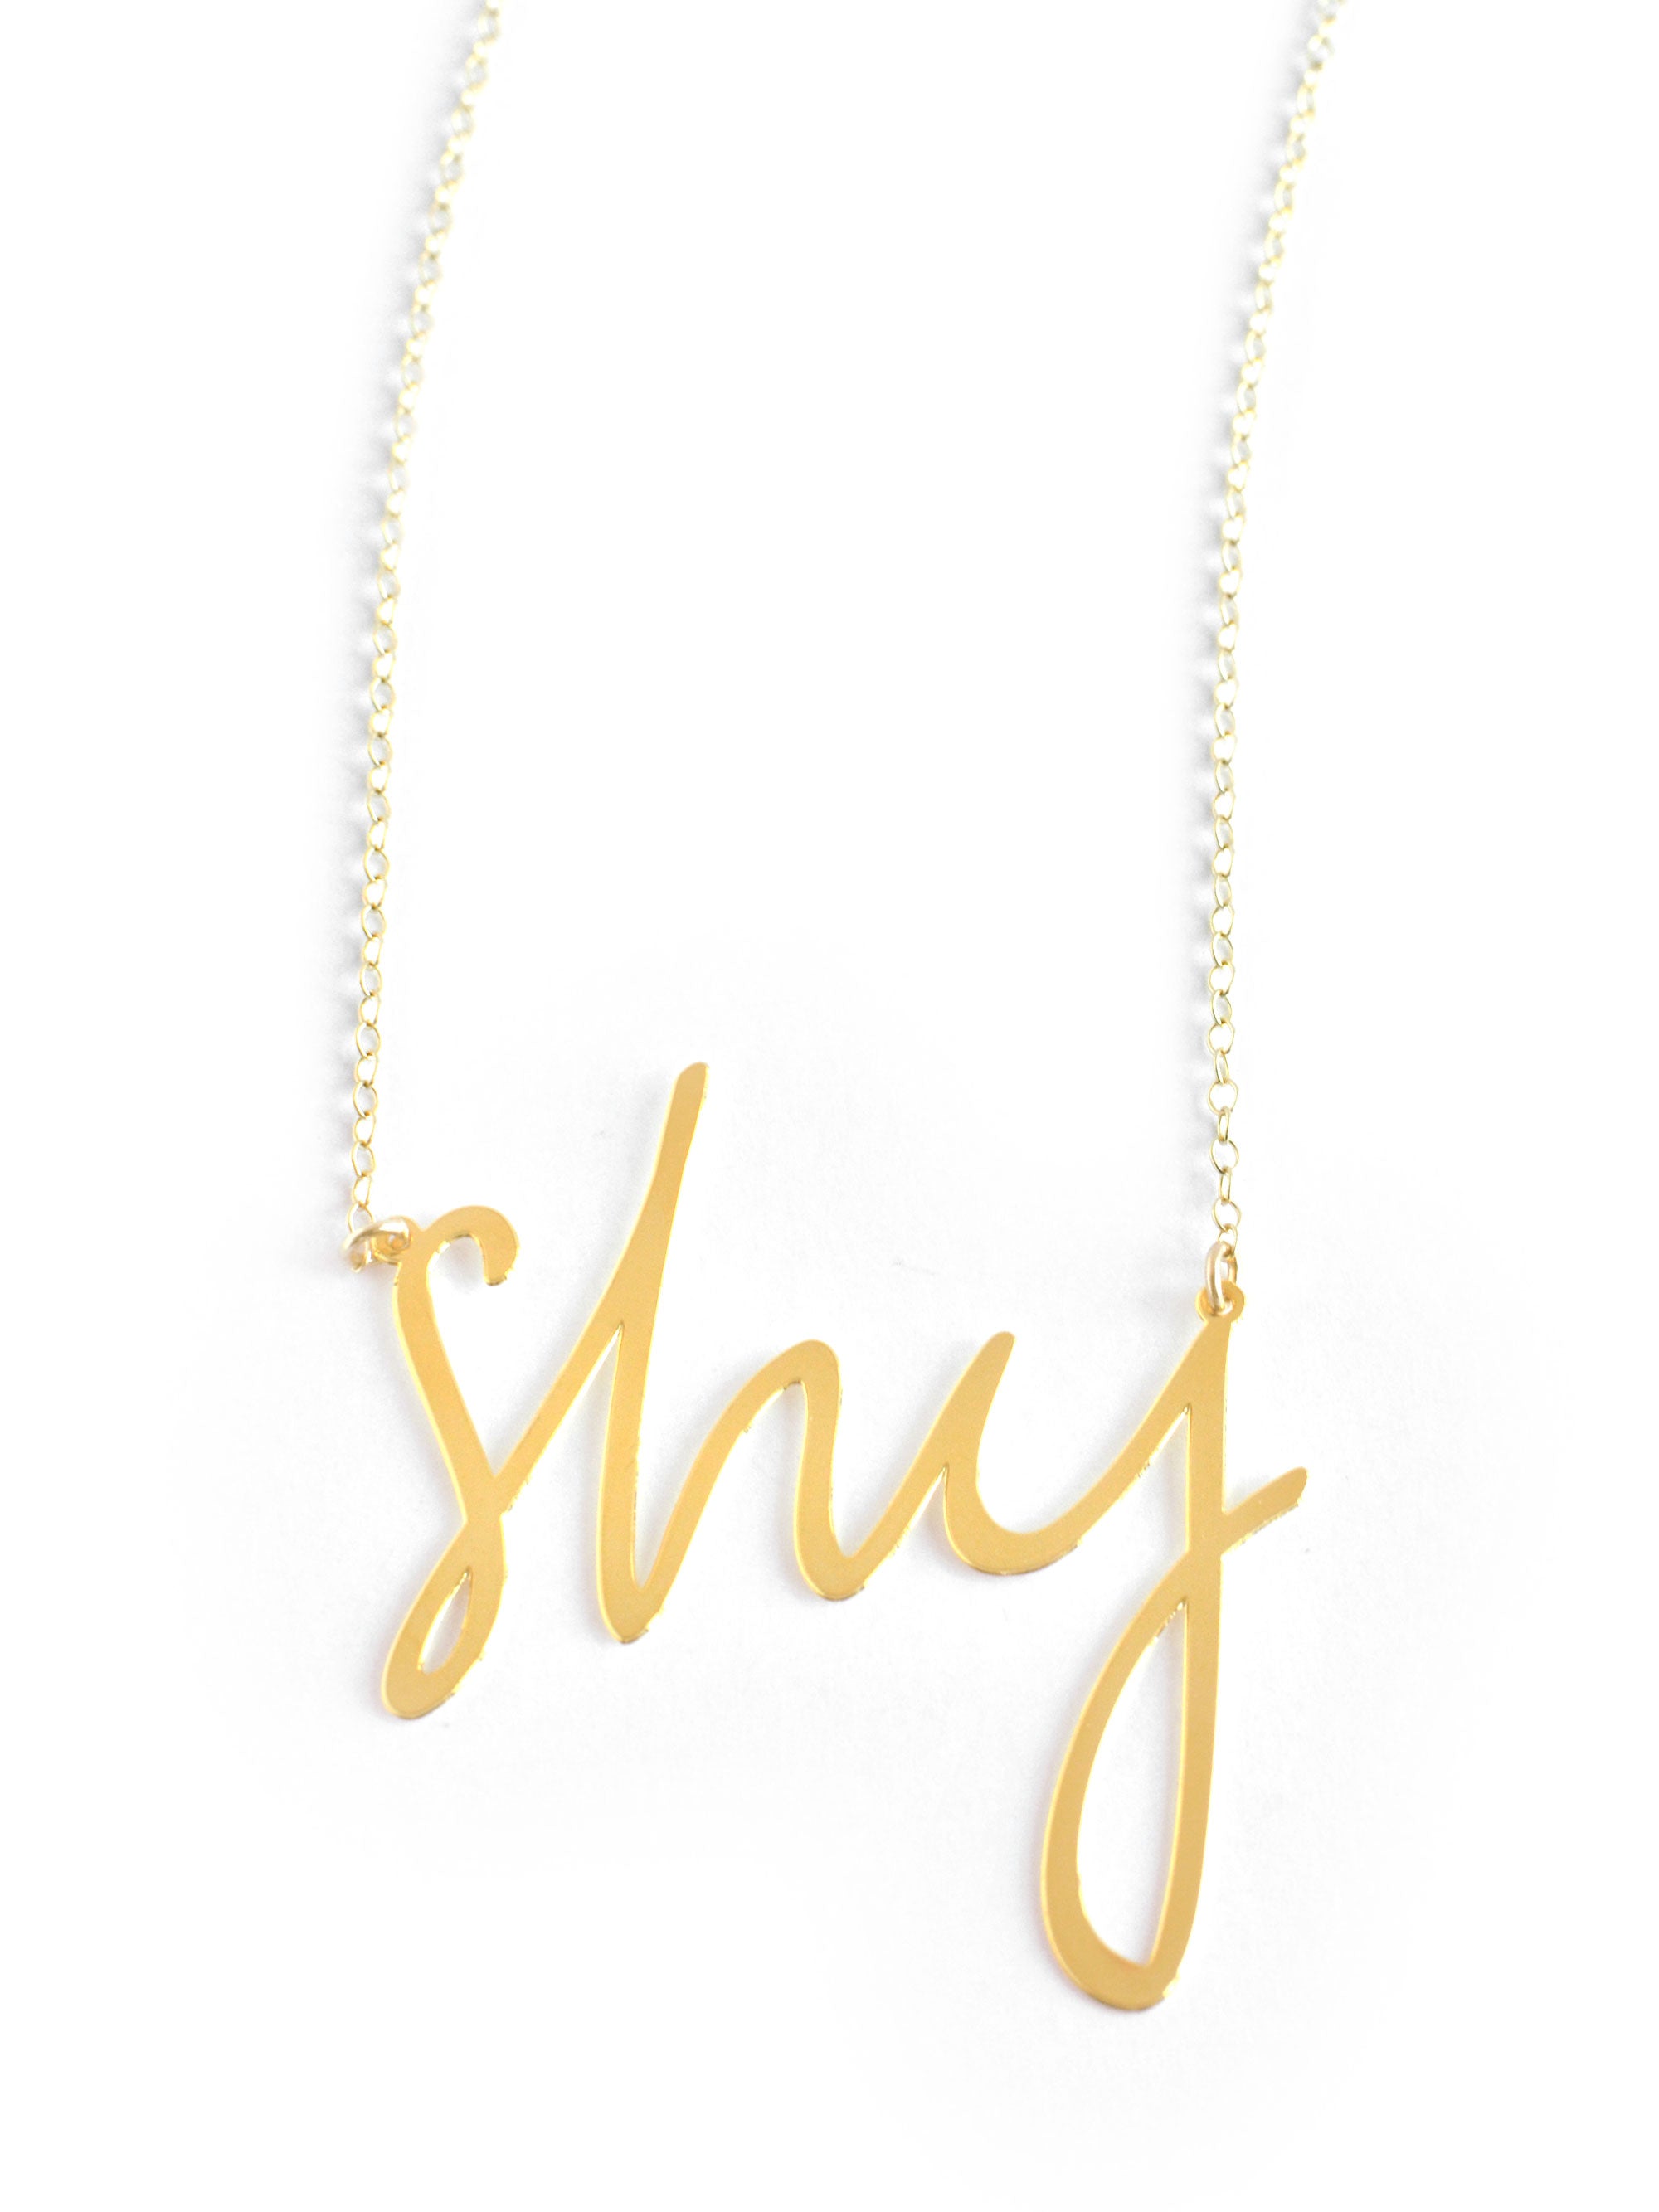 Shy Necklace - High Quality, Affordable, Hand Written, Self Love, Mantra Word Necklace - Available in Gold and Silver - Small and Large Sizes - Made in USA - Brevity Jewelry